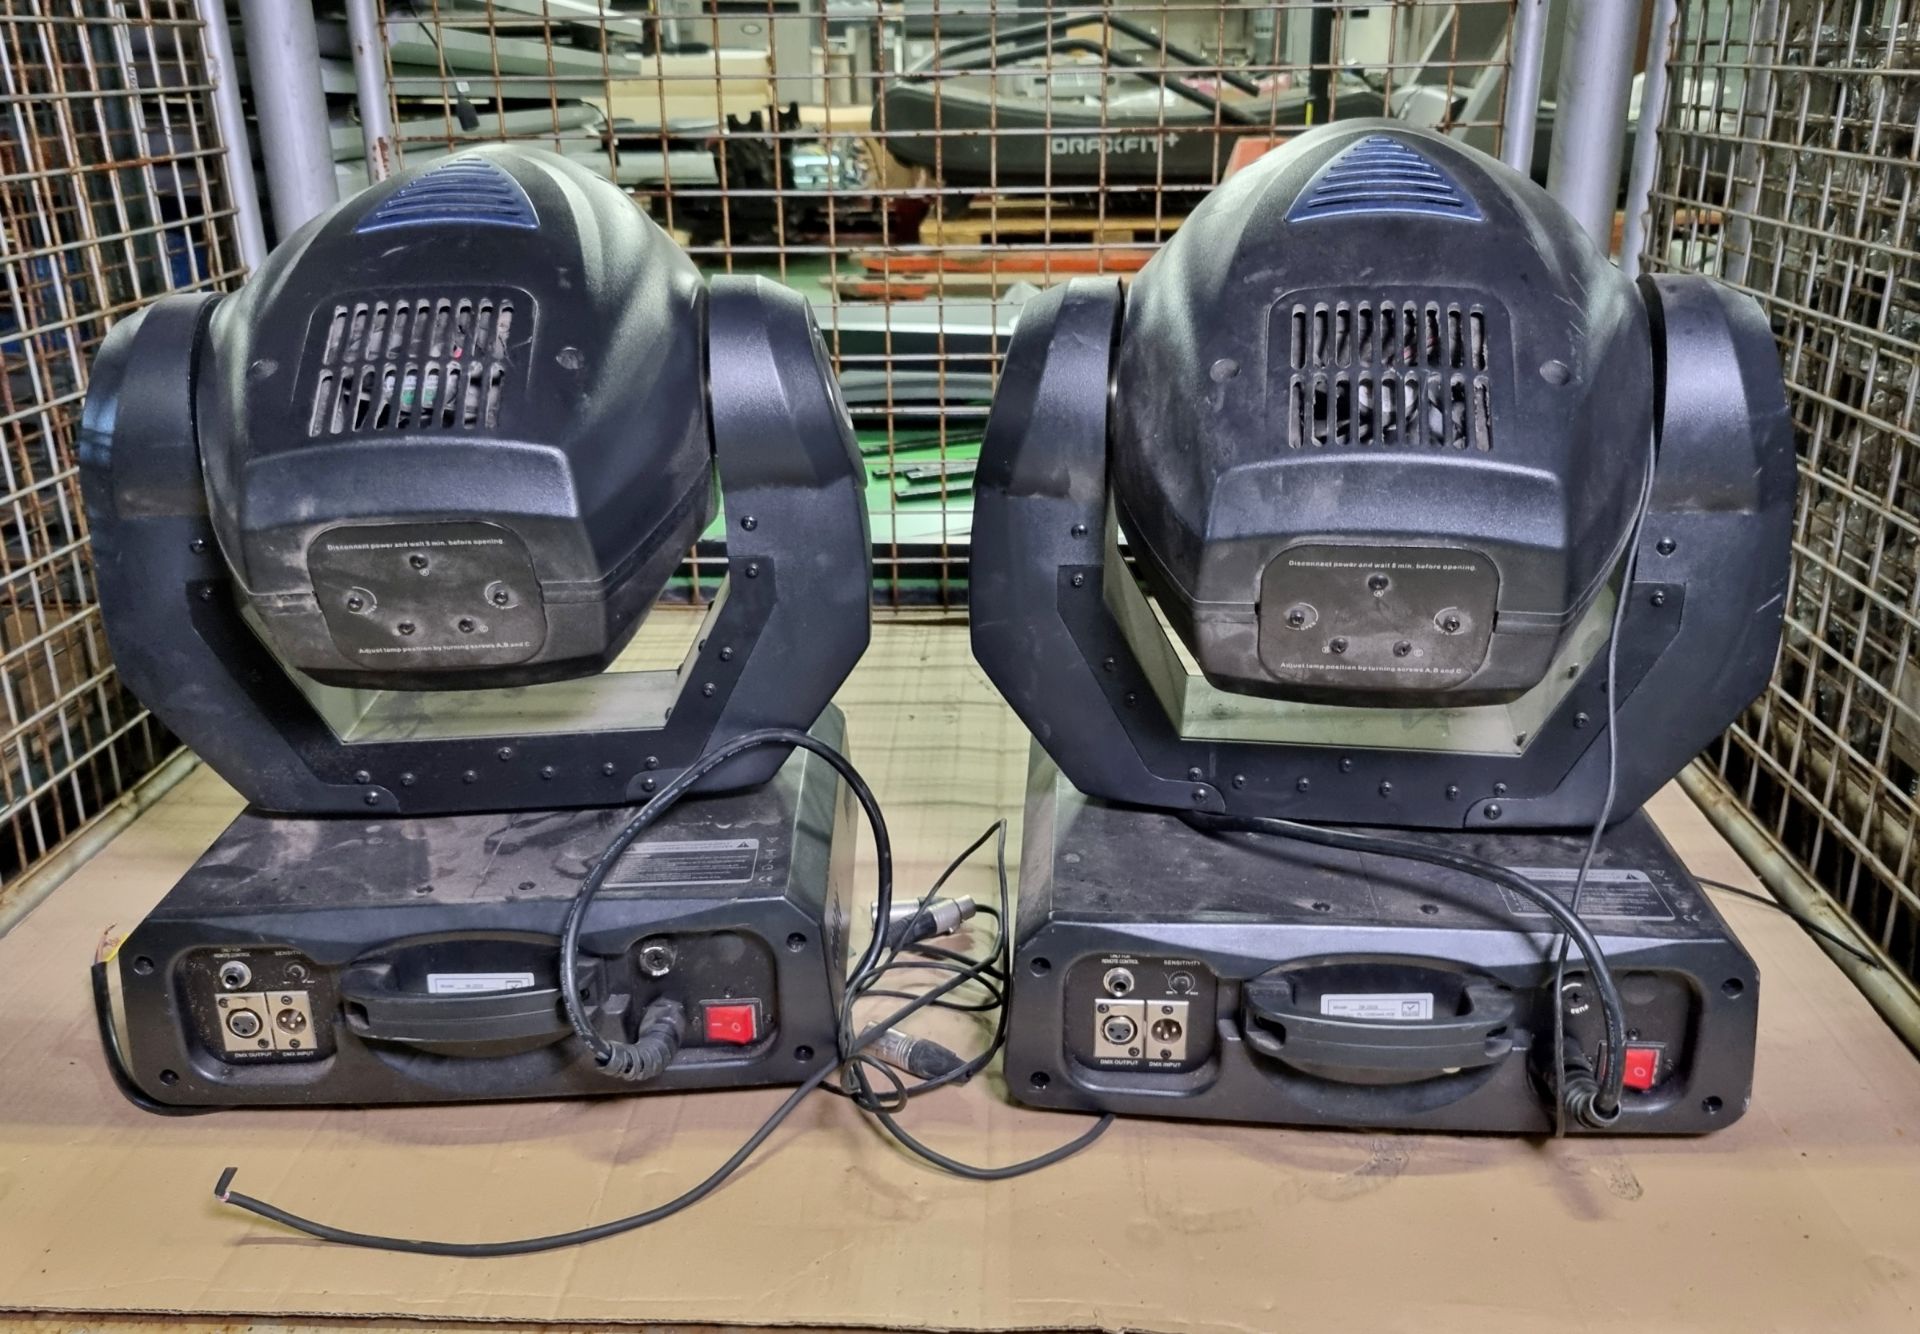 2x iMove 250S moving head scanner lights - Image 5 of 7